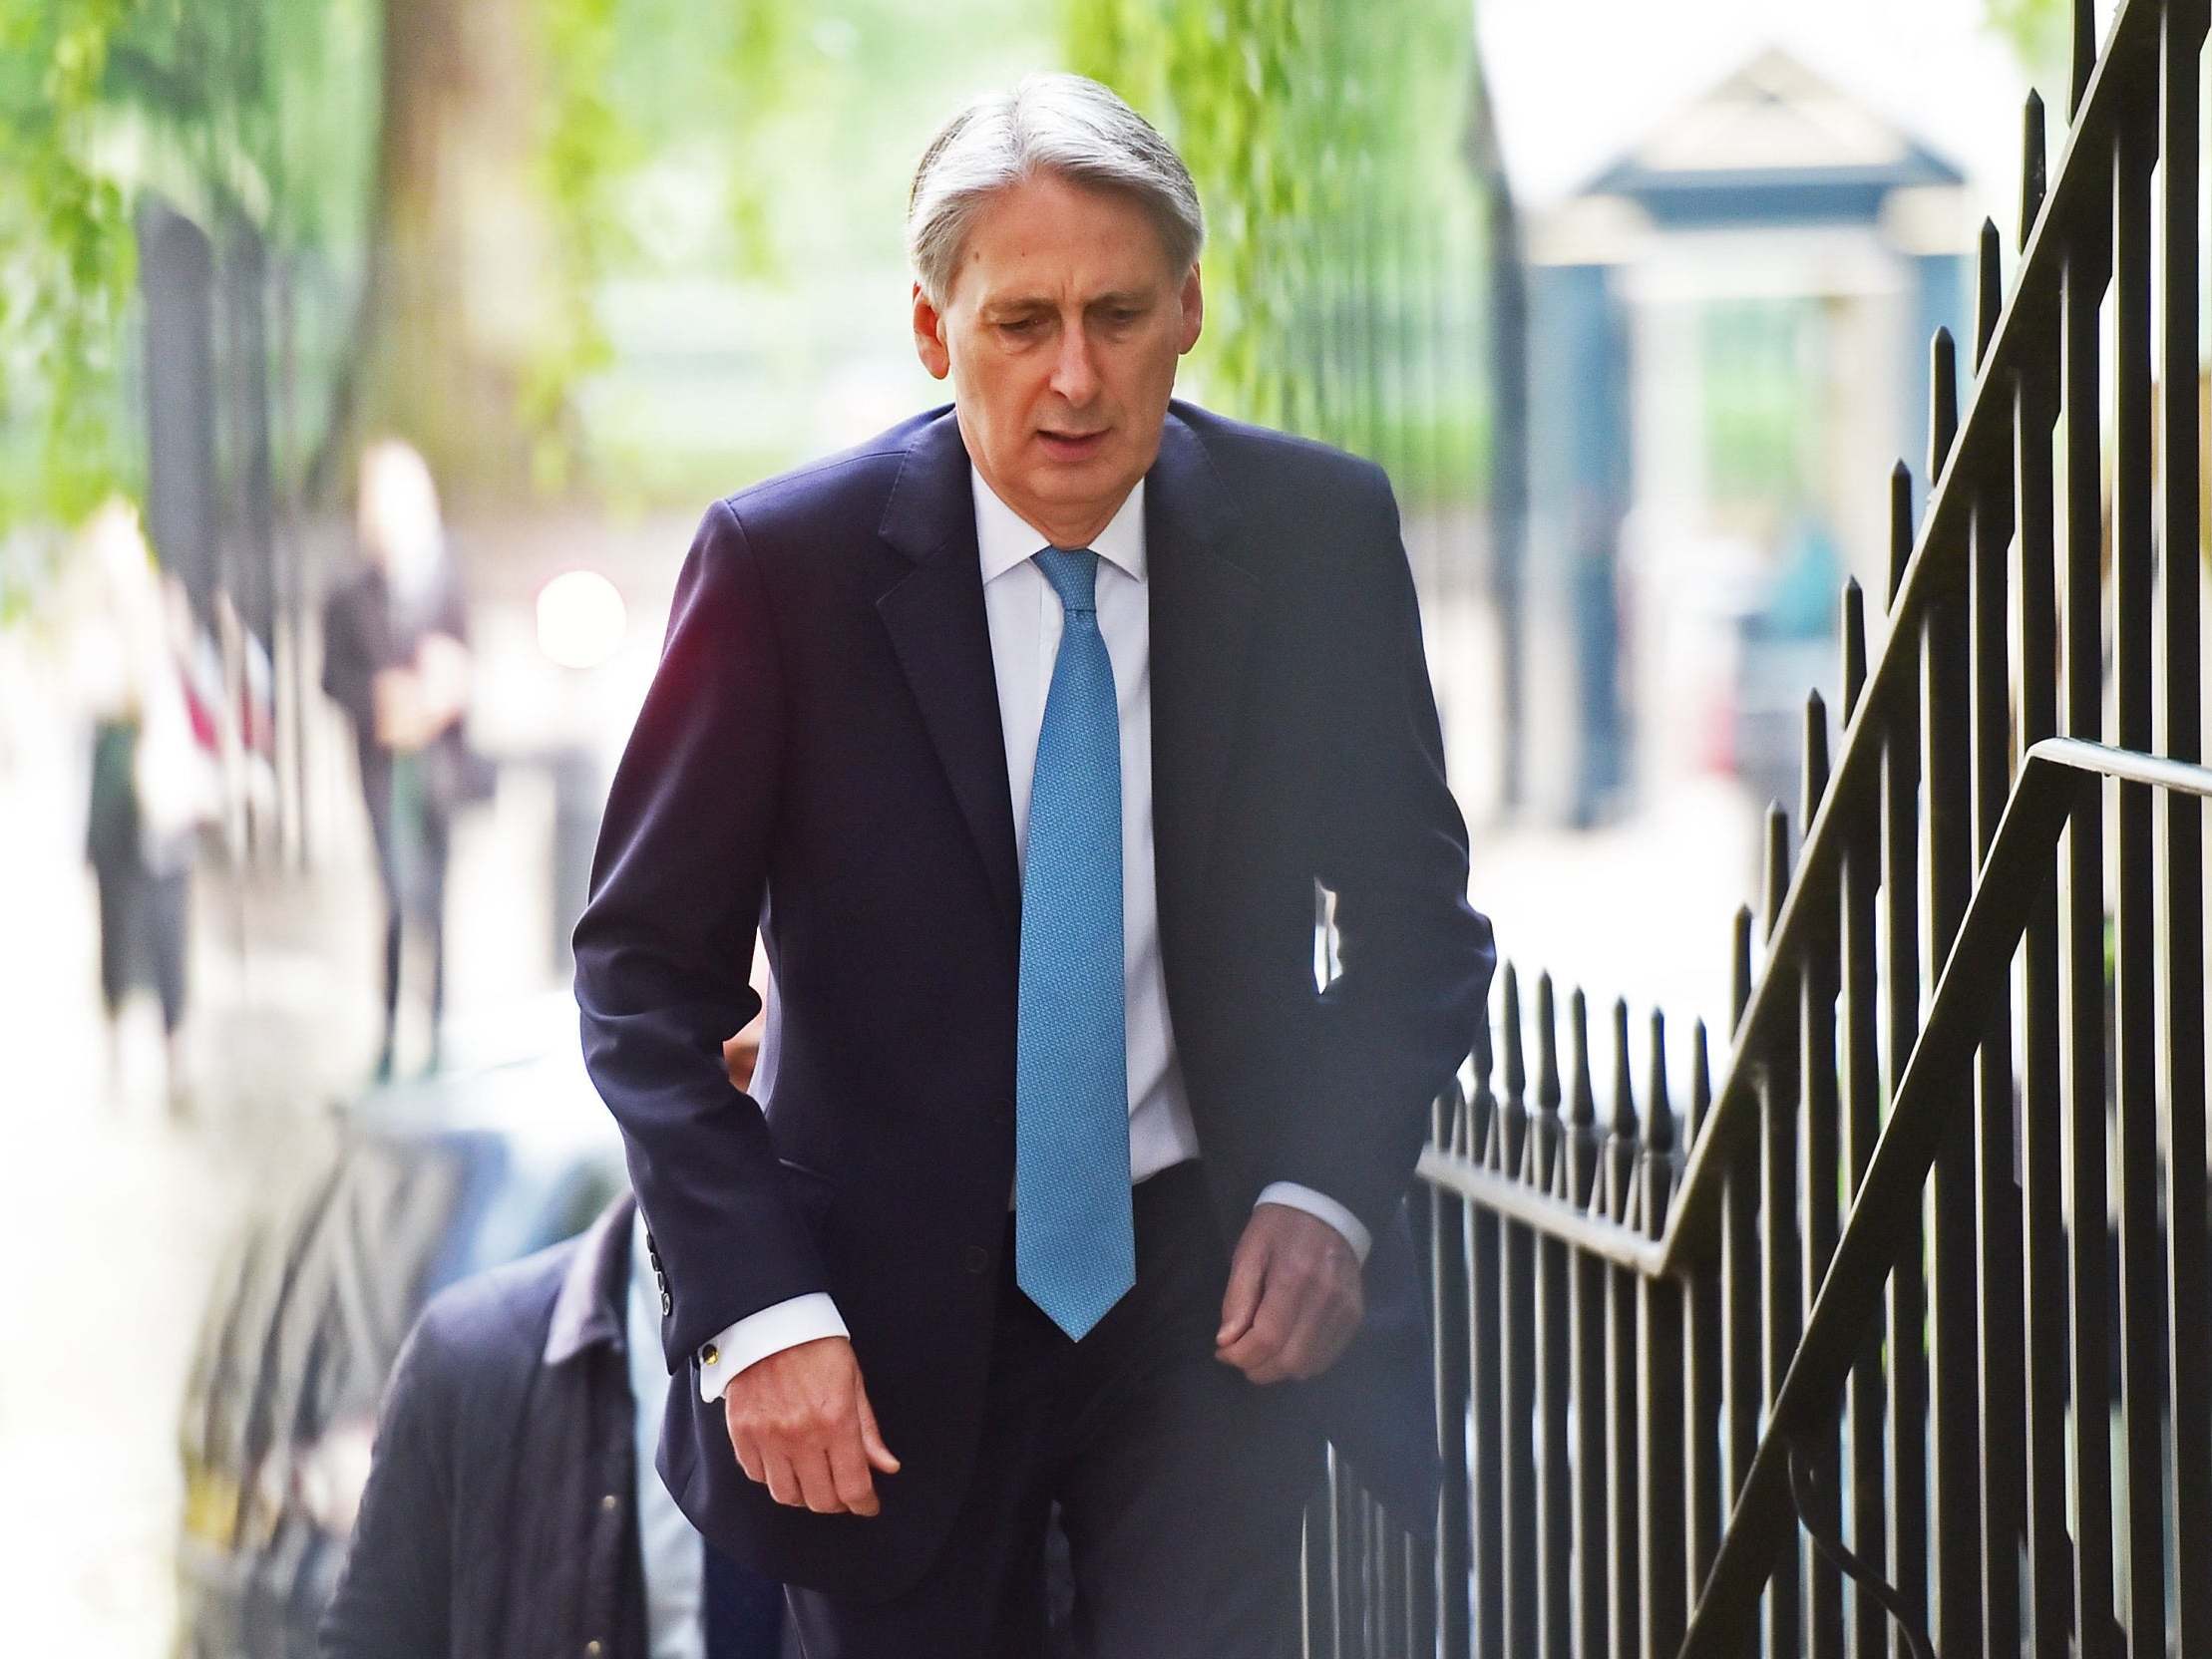 Philip Hammond is reported to be at the head of a group of around 30 Tory MPs determined to prevent no deal